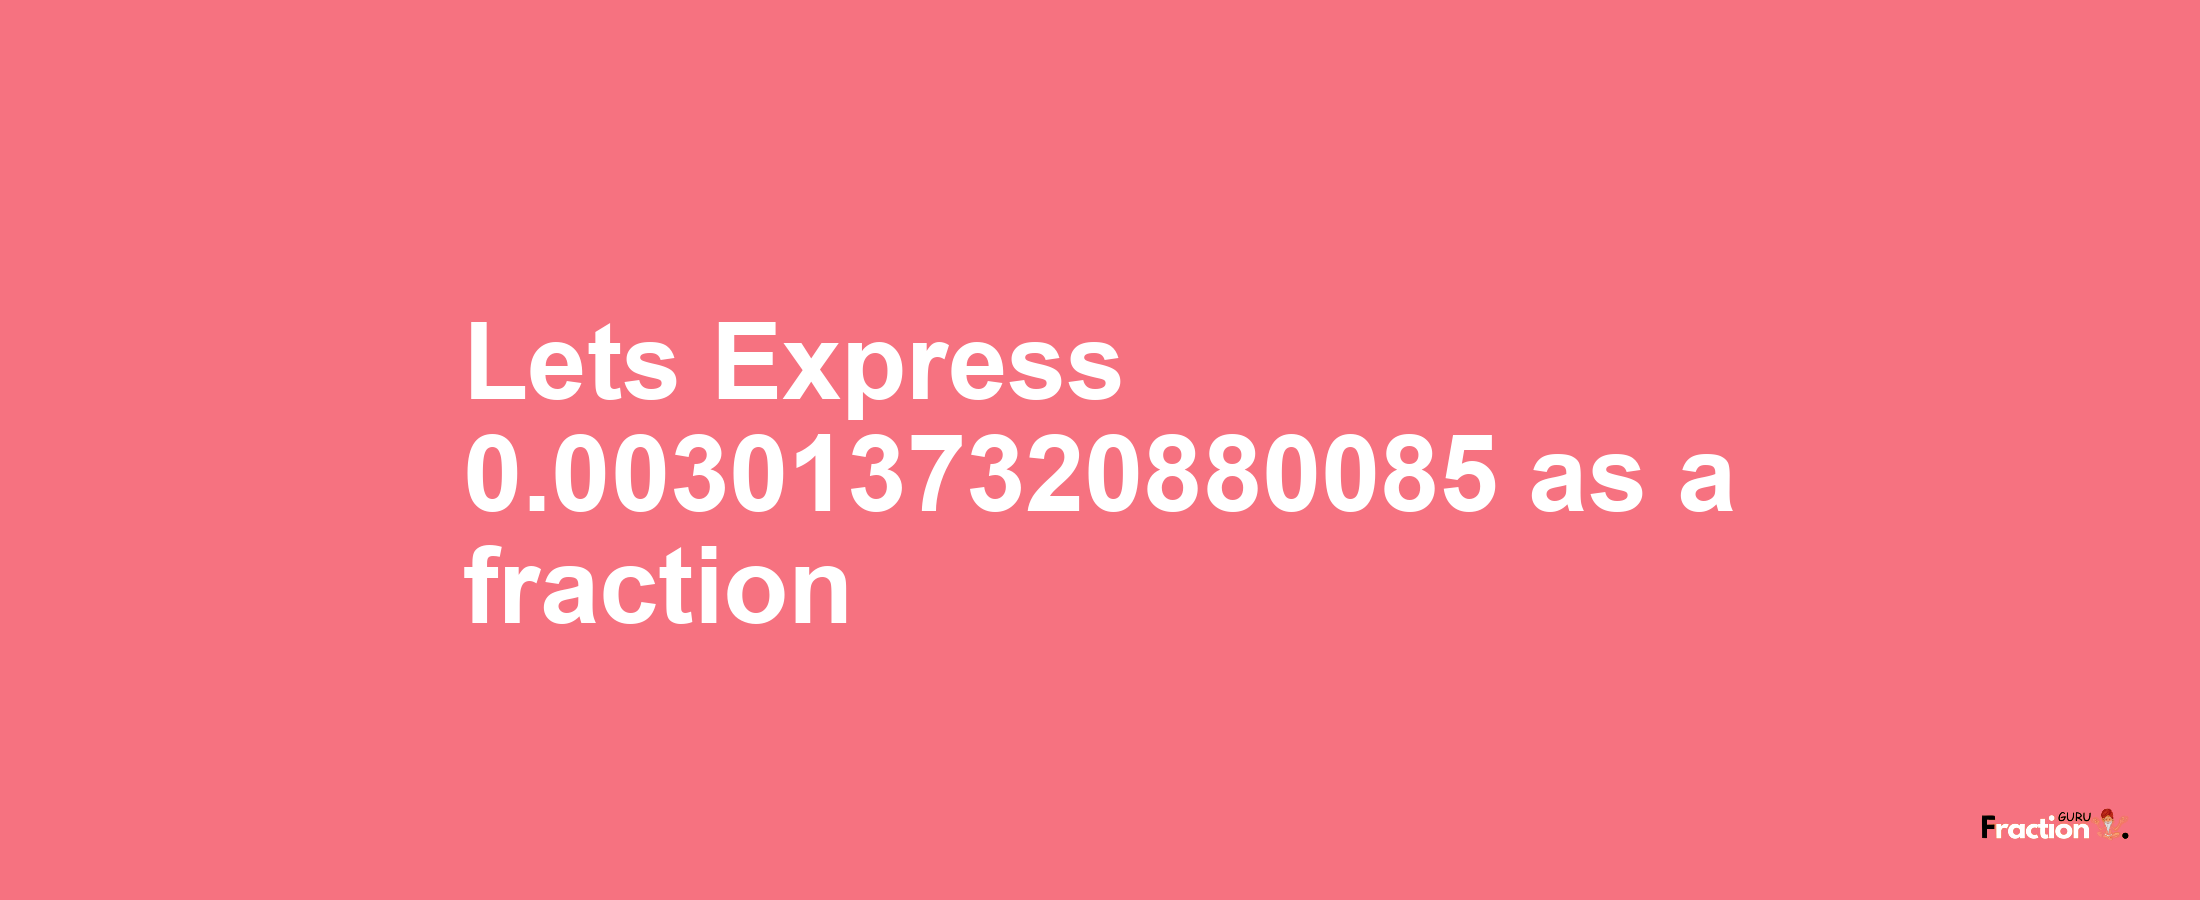 Lets Express 0.0030137320880085 as afraction